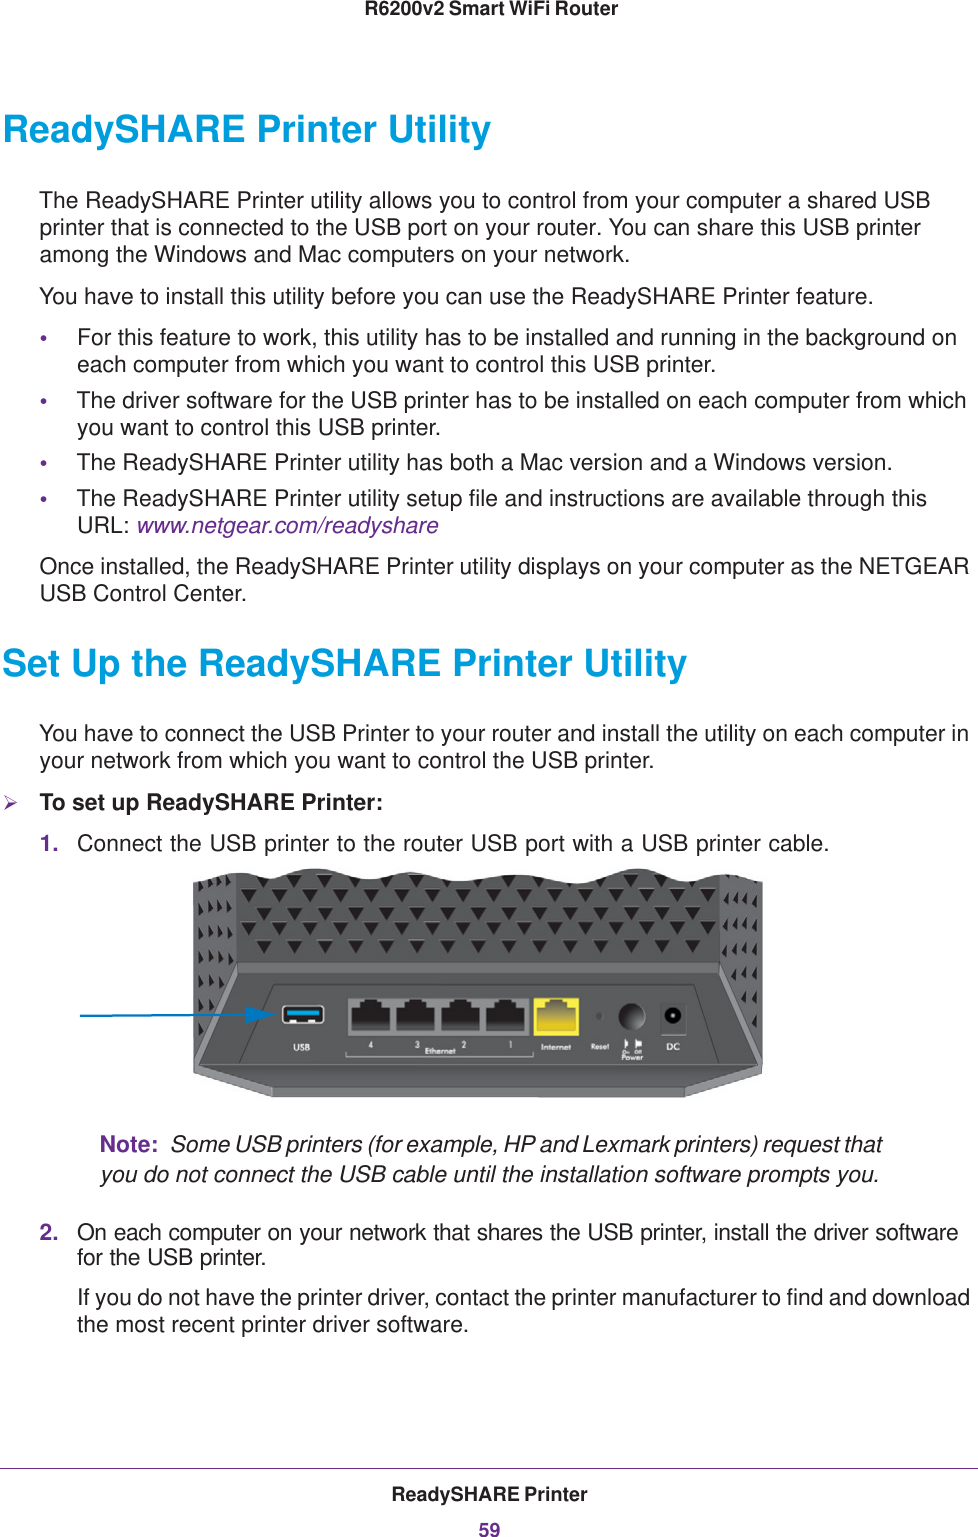 ReadySHARE Printer59 R6200v2 Smart WiFi RouterReadySHARE Printer UtilityThe ReadySHARE Printer utility allows you to control from your computer a shared USB printer that is connected to the USB port on your router. You can share this USB printer among the Windows and Mac computers on your network.You have to install this utility before you can use the ReadySHARE Printer feature.•For this feature to work, this utility has to be installed and running in the background on each computer from which you want to control this USB printer.•The driver software for the USB printer has to be installed on each computer from which you want to control this USB printer.•The ReadySHARE Printer utility has both a Mac version and a Windows version.•The ReadySHARE Printer utility setup file and instructions are available through this URL: www.netgear.com/readyshareOnce installed, the ReadySHARE Printer utility displays on your computer as the NETGEAR USB Control Center.Set Up the ReadySHARE Printer UtilityYou have to connect the USB Printer to your router and install the utility on each computer in your network from which you want to control the USB printer. To set up ReadySHARE Printer:1. Connect the USB printer to the router USB port with a USB printer cable.Note:  Some USB printers (for example, HP and Lexmark printers) request that you do not connect the USB cable until the installation software prompts you.2. On each computer on your network that shares the USB printer, install the driver software for the USB printer.If you do not have the printer driver, contact the printer manufacturer to find and download the most recent printer driver software.